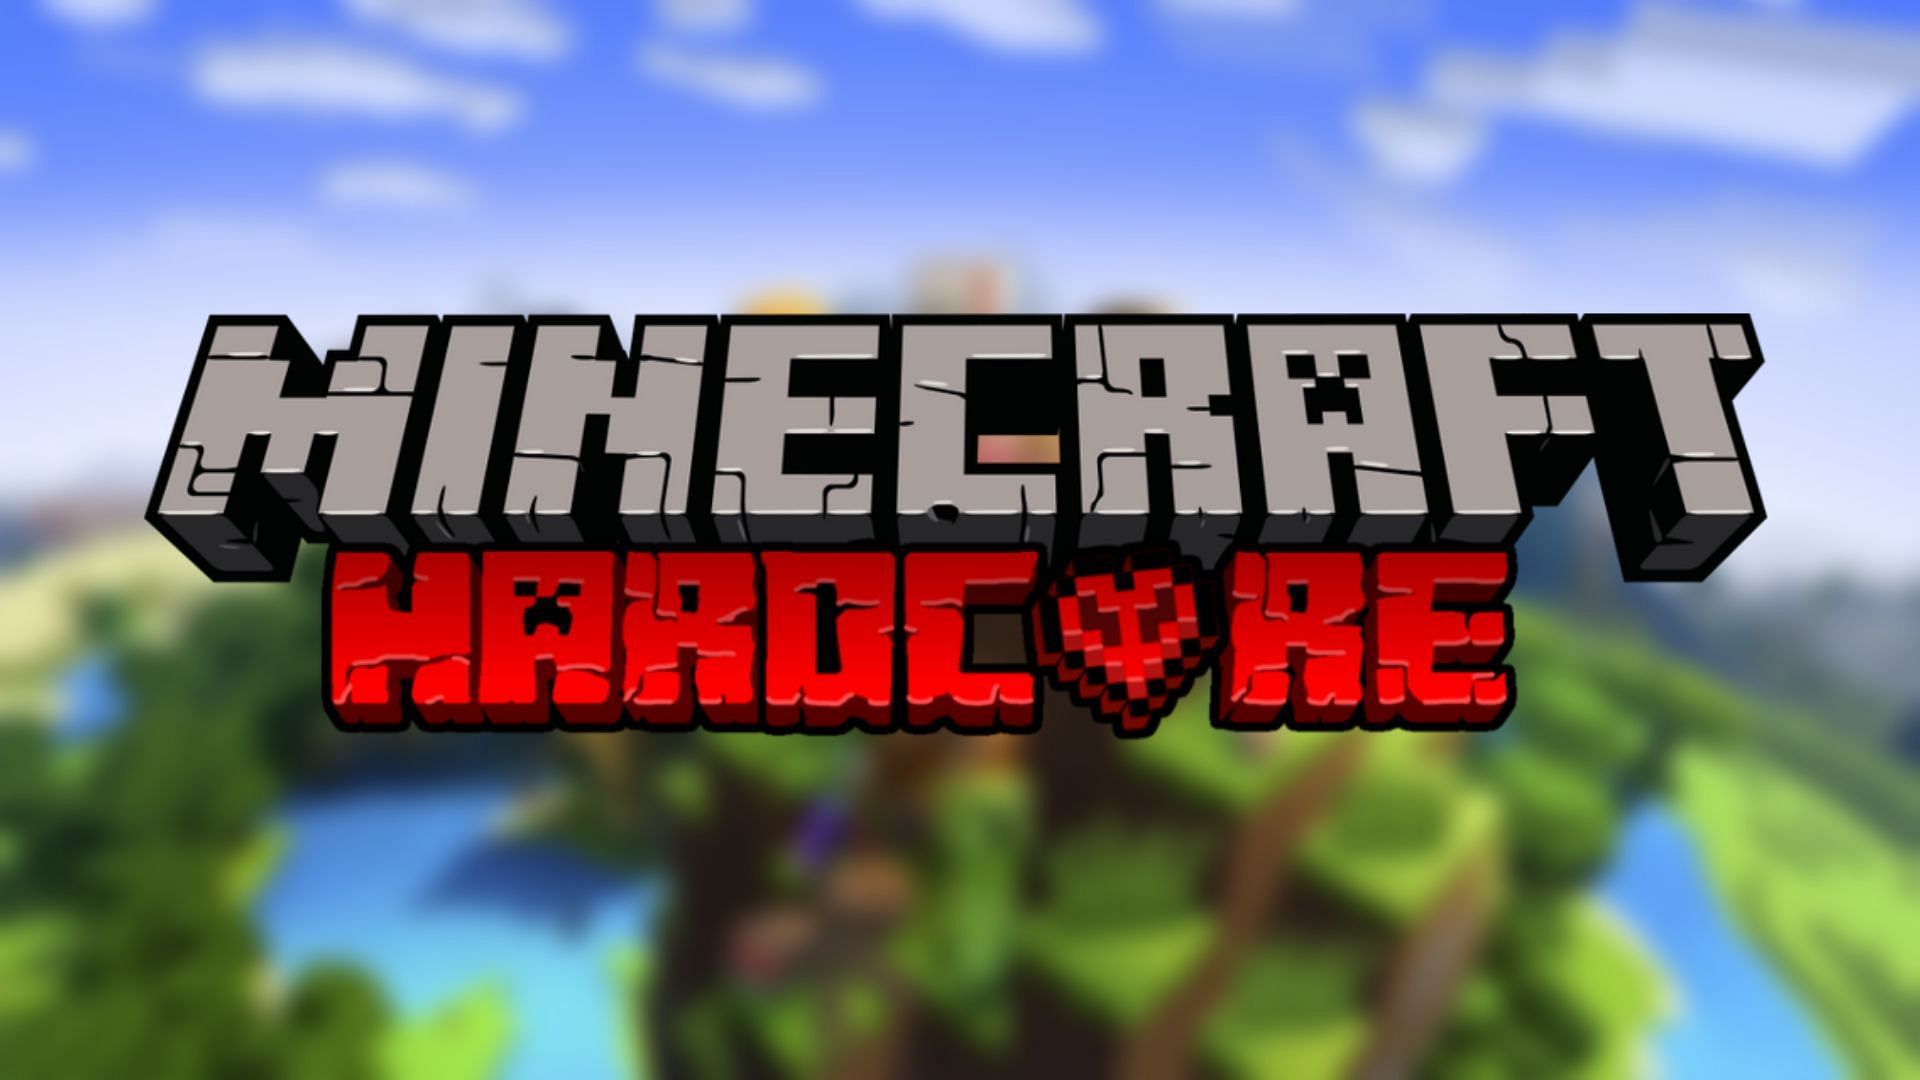 Hardcore mode is coming to Minecraft Bedrock, as reported by content creators